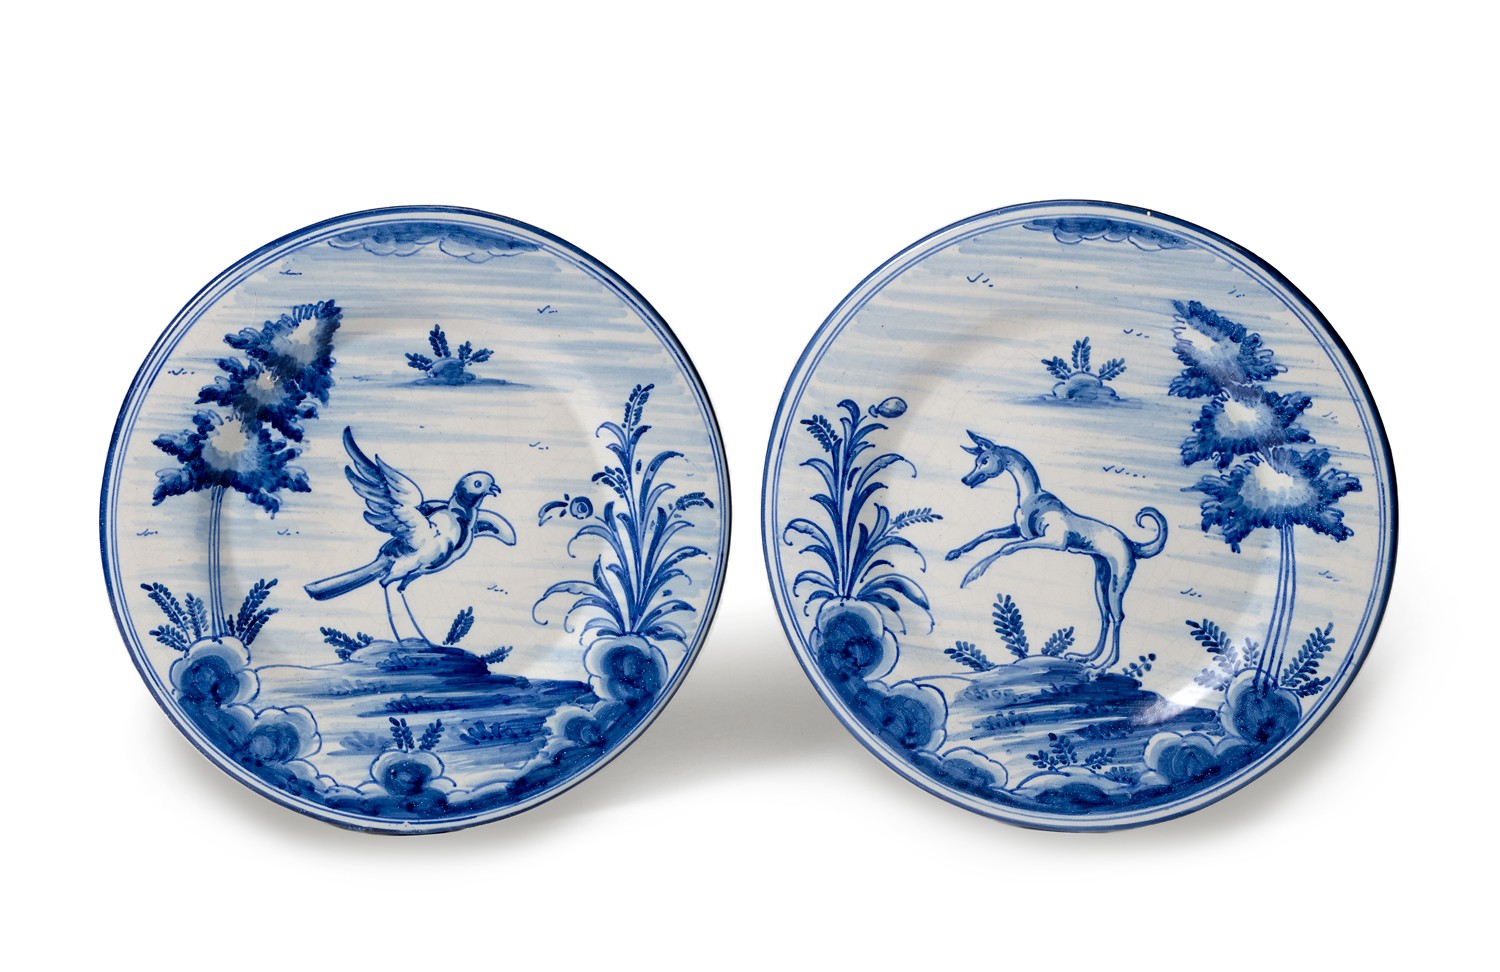 TWO TALAVERA BLUE AND WHITE MAJOLICA PLATES, EARLY 20TH CENTURY